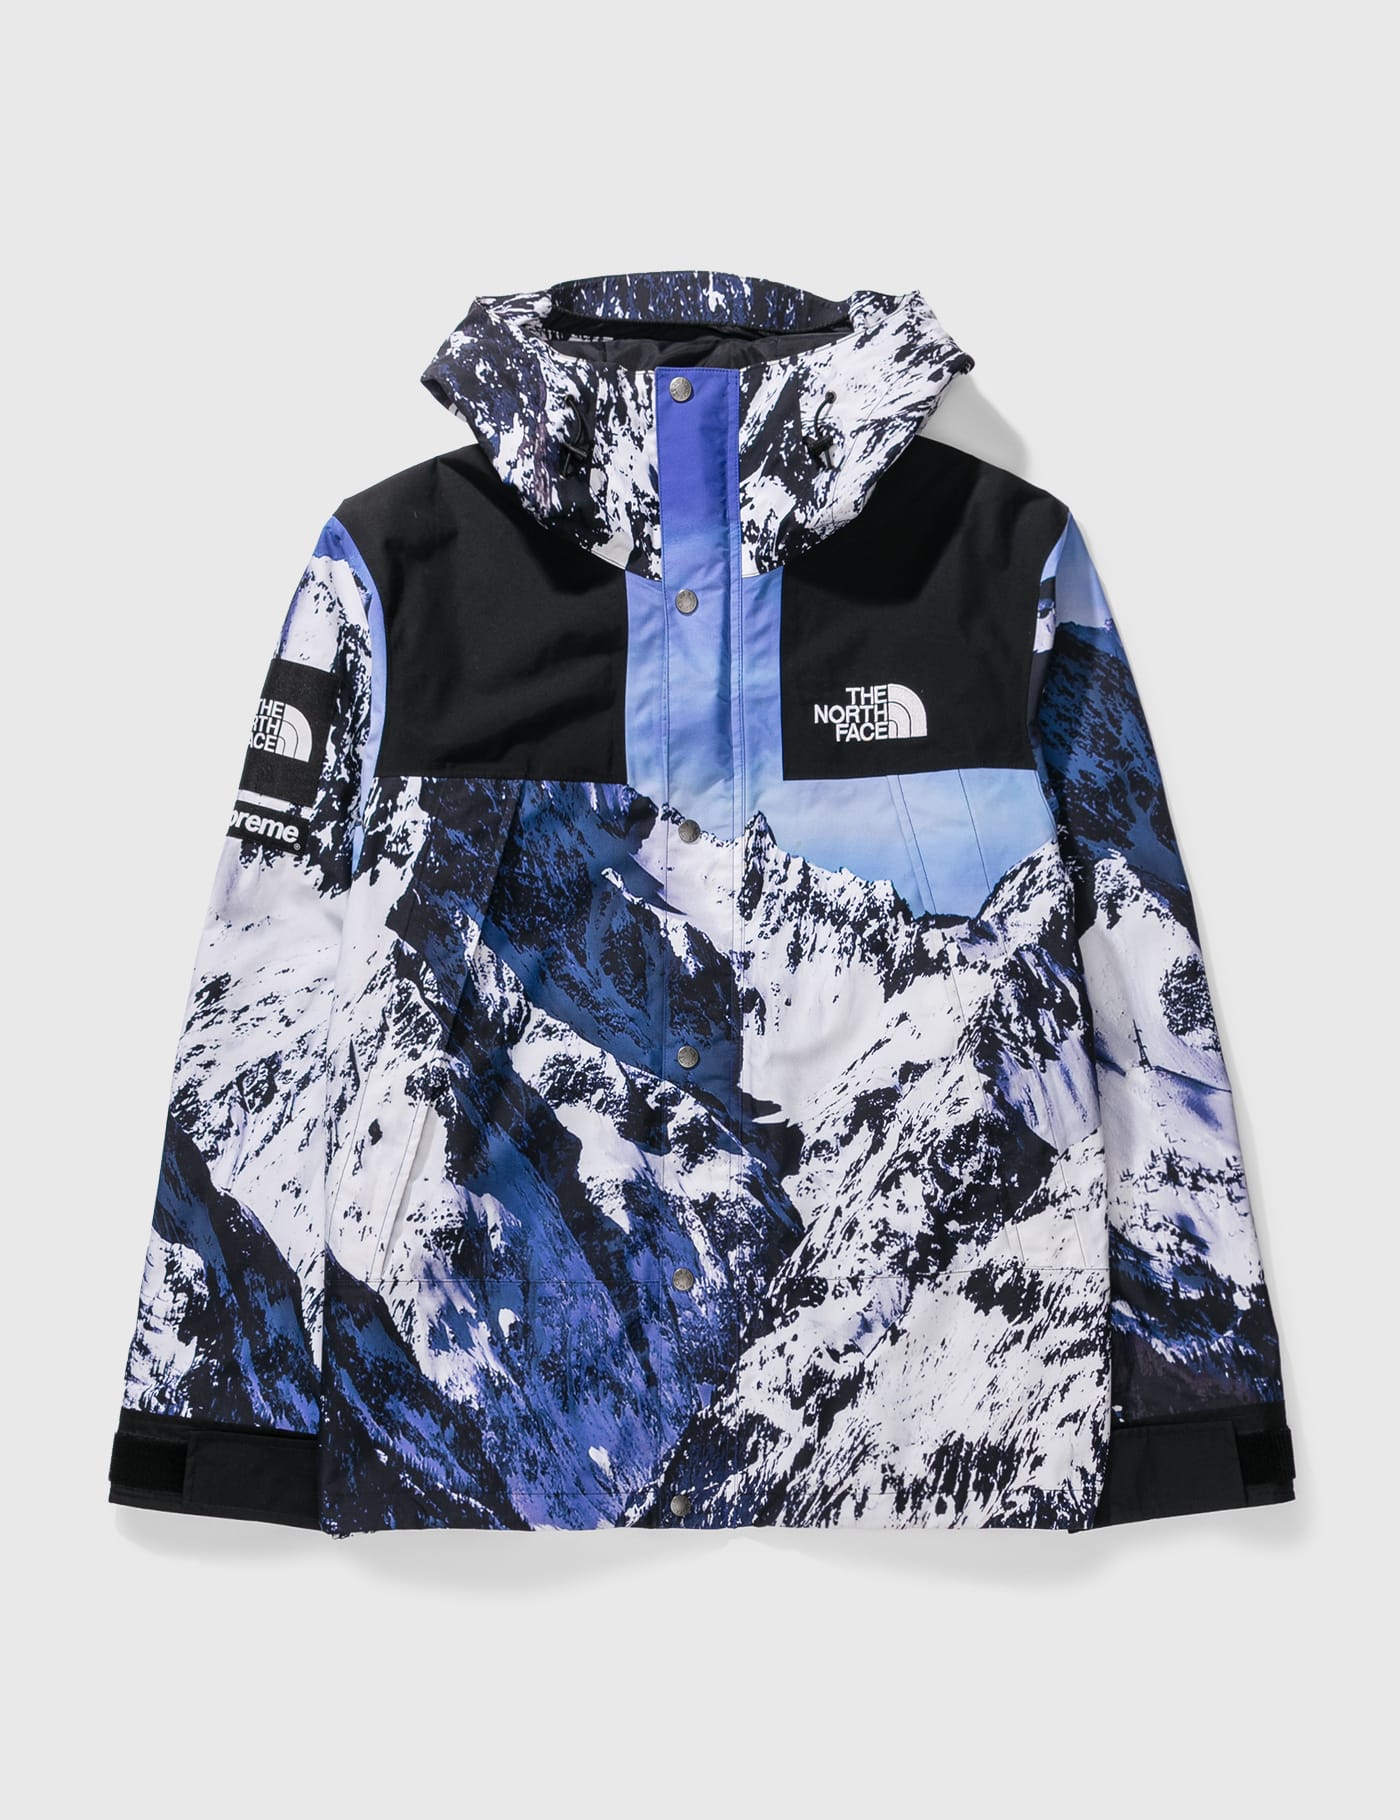 supreme north face jacket mountain